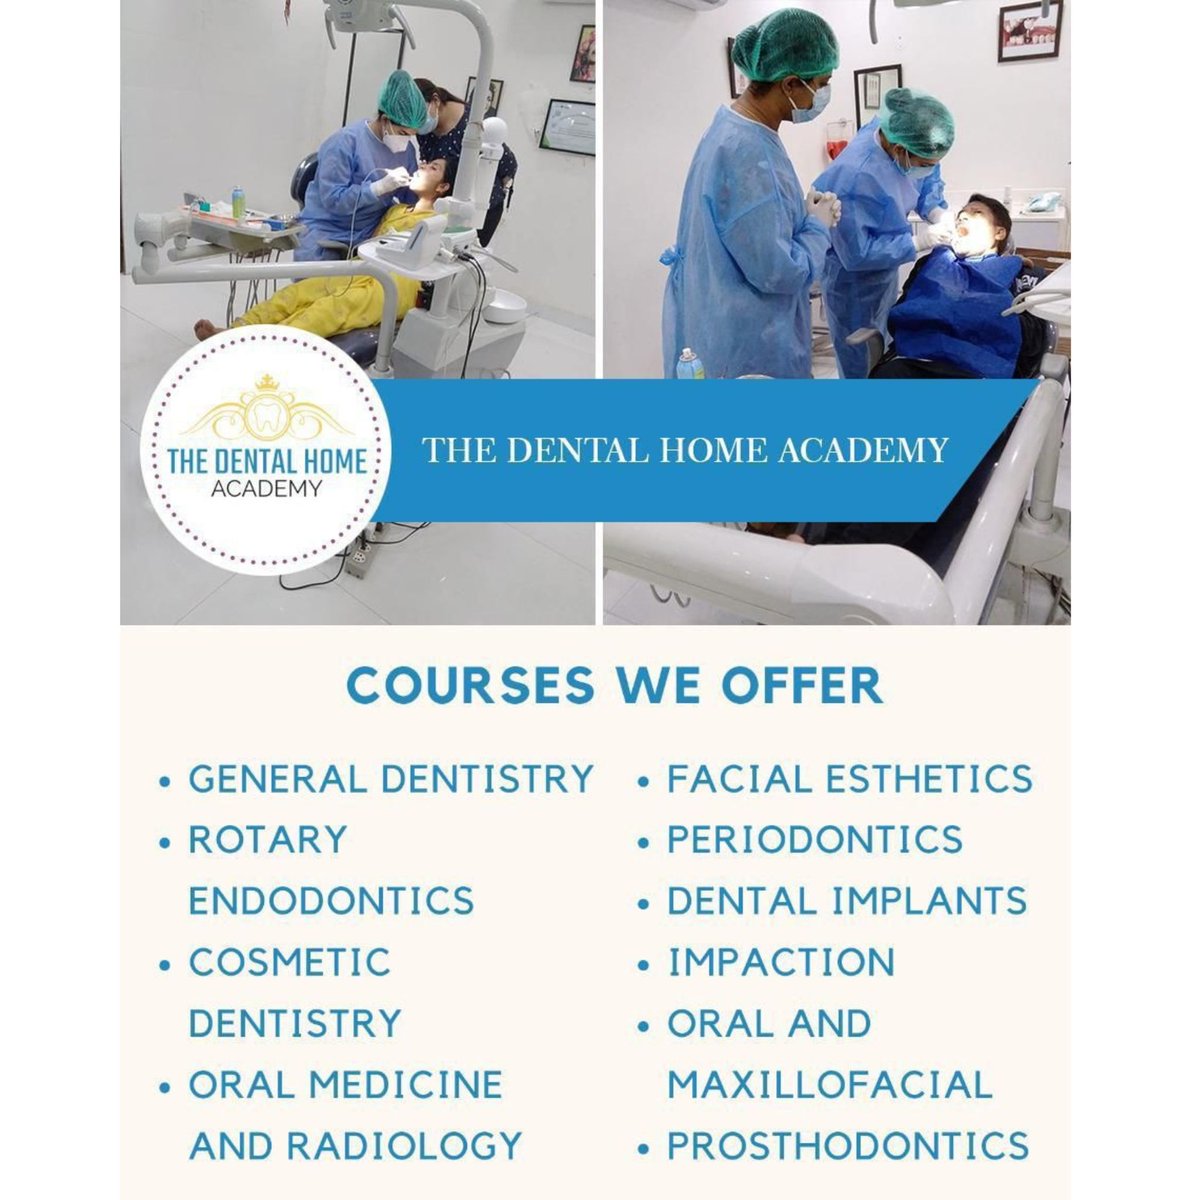 Today is another chance to work on your goals!!
.
Dental Hands on Course at The Dental Home Academy to help you achieve your goals and dreams
.
Courses offer:
• General Dentistry
• ⁠Rotary endodontics
• ⁠Oral surgery
• ⁠Impactions
• ⁠Dental Implants
• ⁠Dental cosmetics